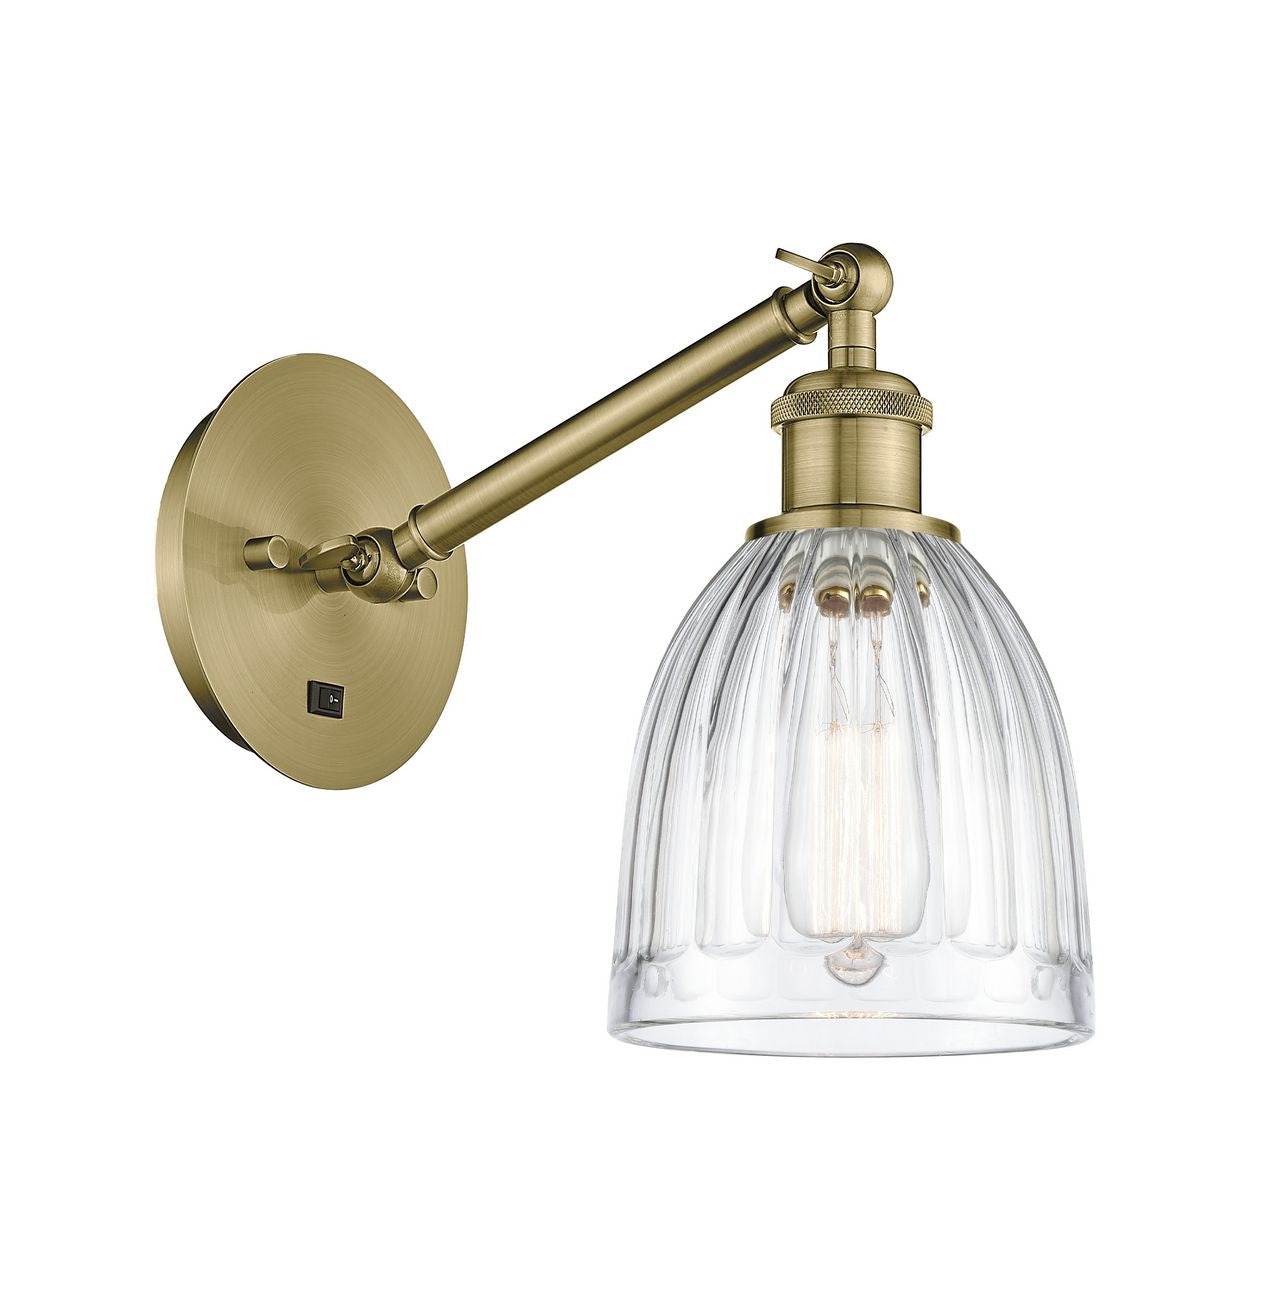 1-Light 5.75" Brookfield Sconce - Drum Clear Glass - Choice of Finish And Incandesent Or LED Bulbs